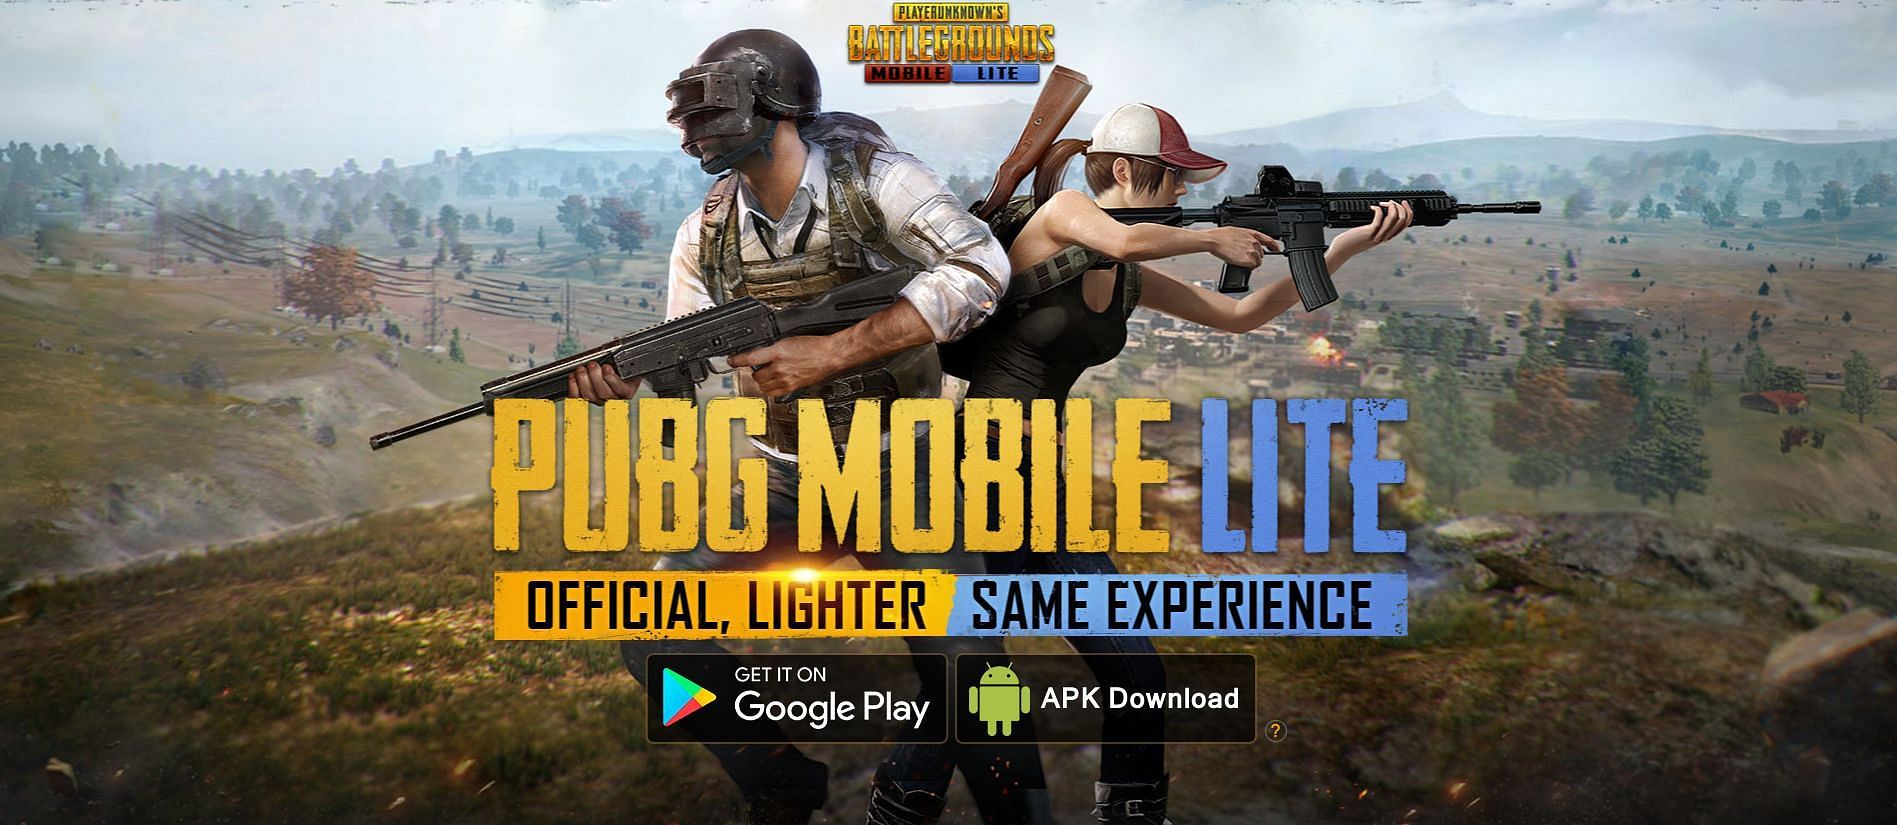 The download the APK file by clicking the APK download button (Image via PUBG Mobile Lite)